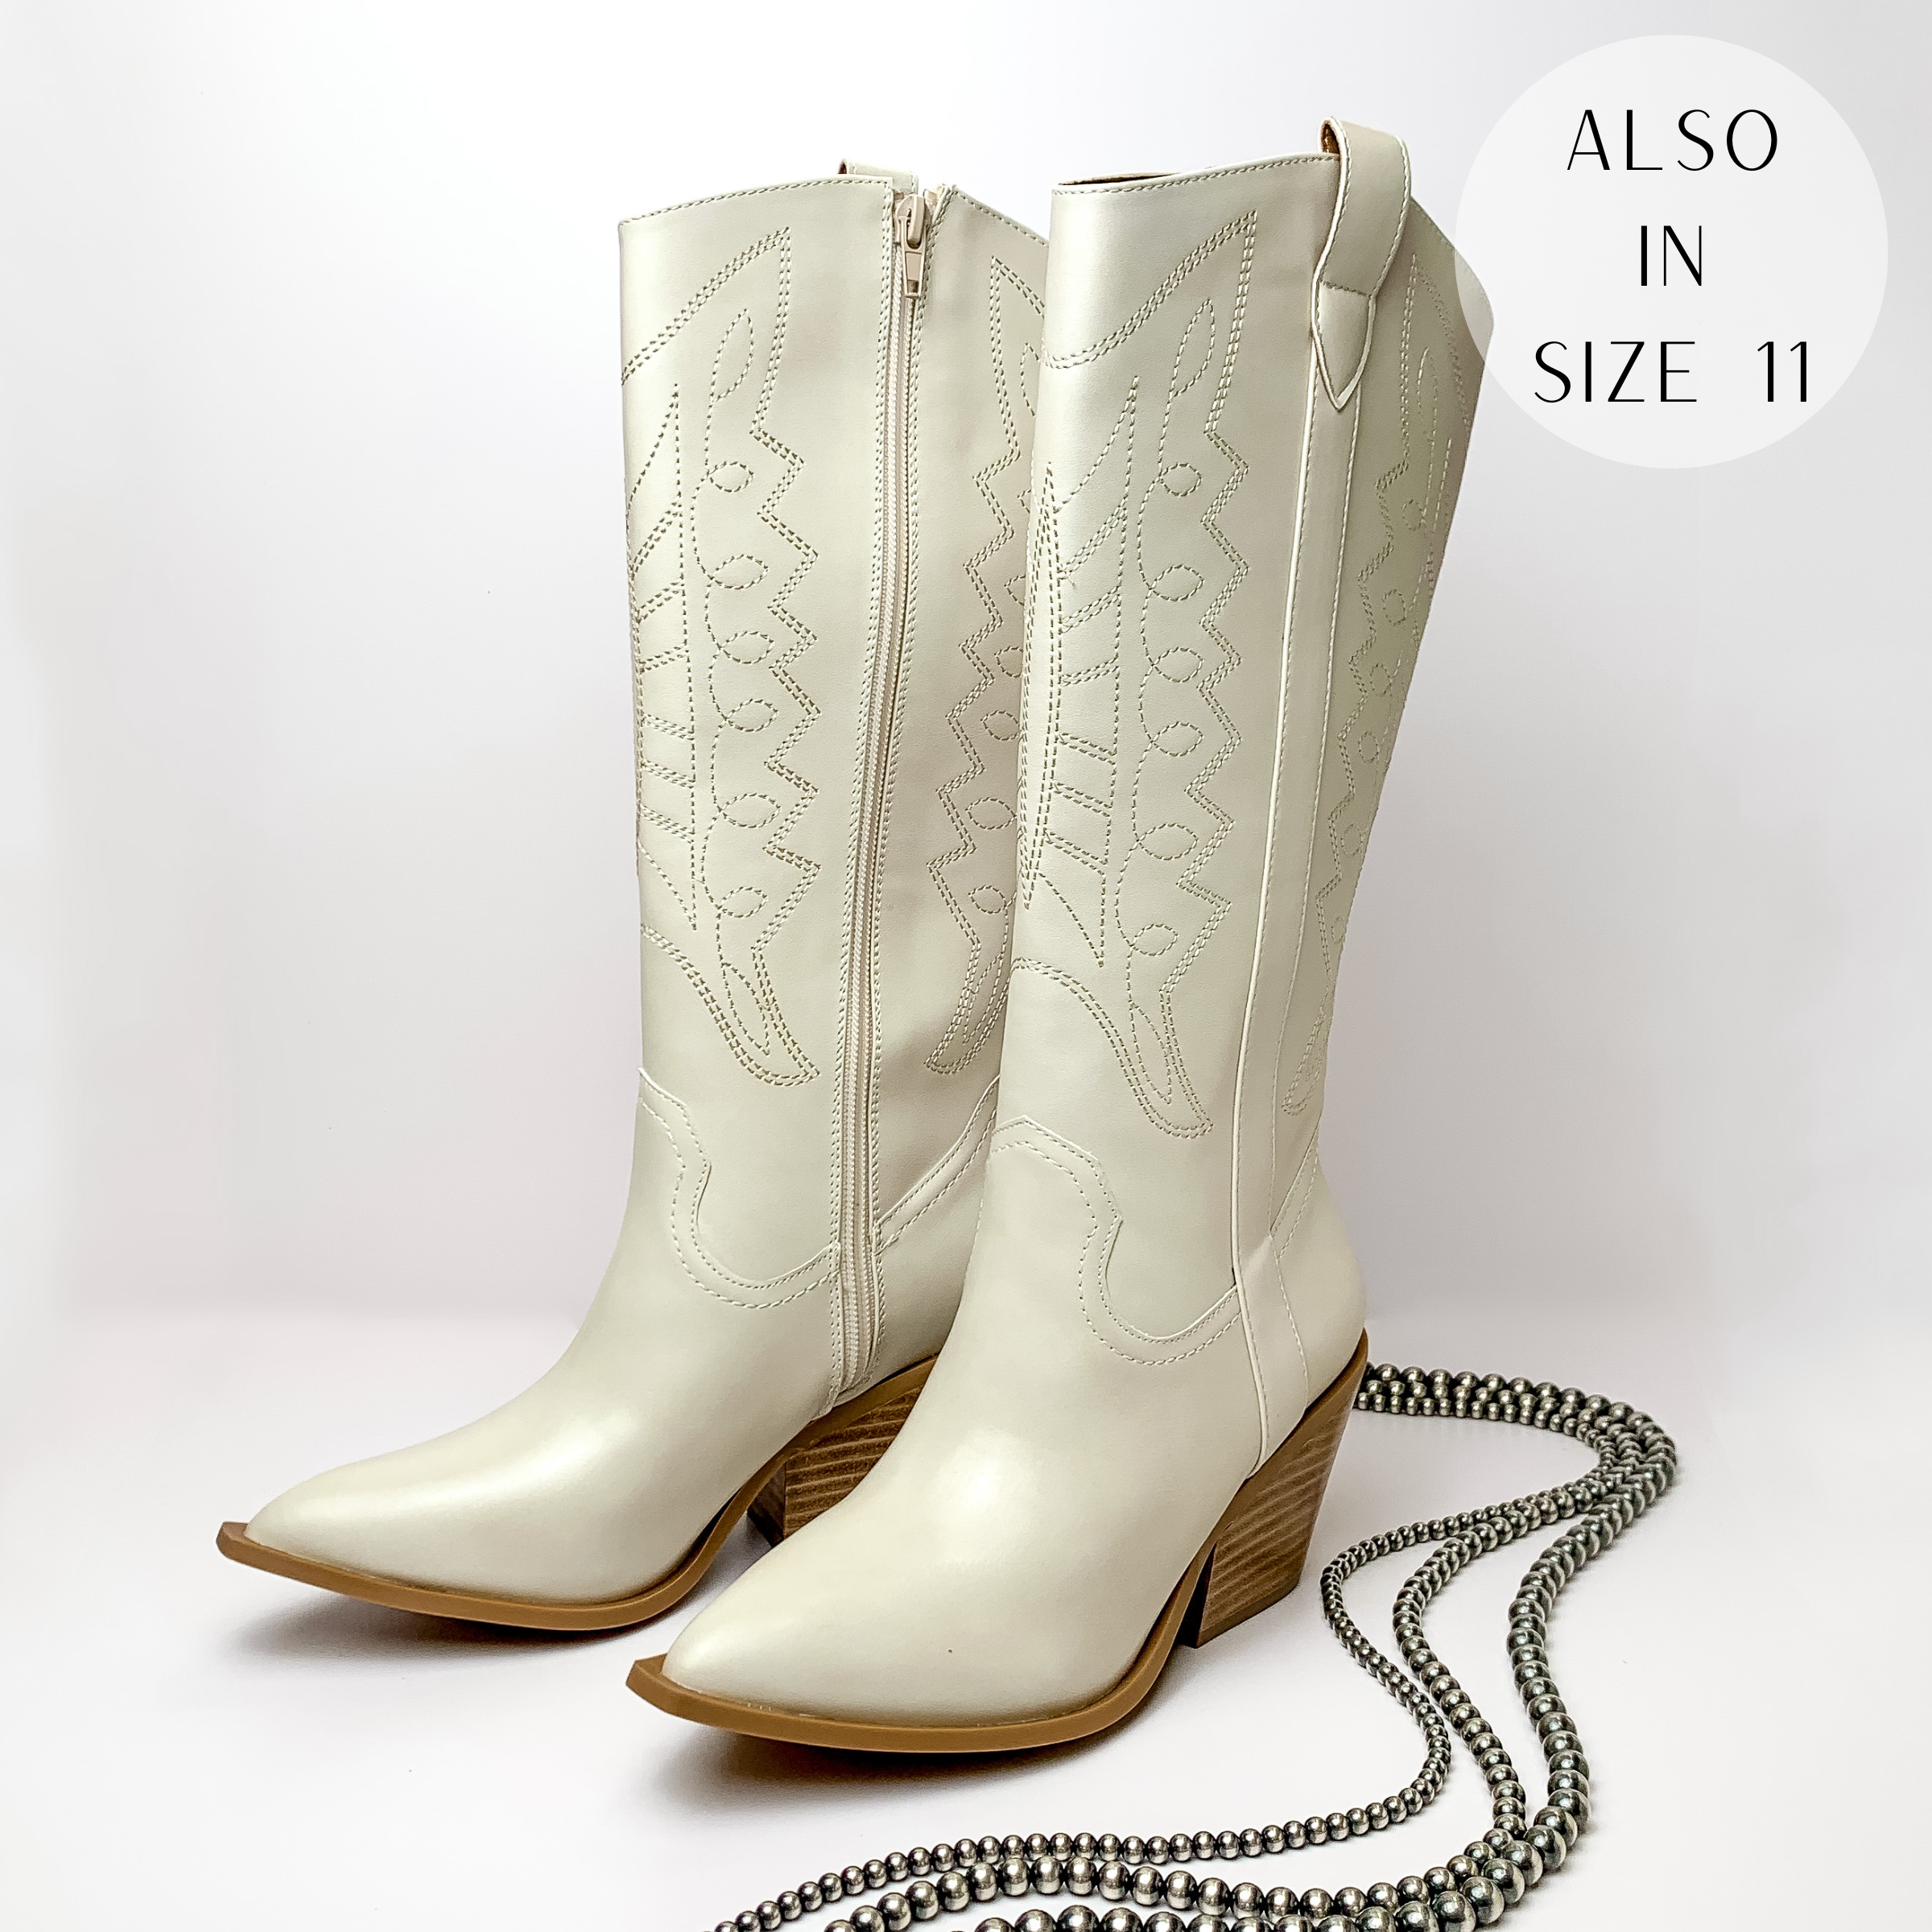 Bone white cowboy boots with ivory western stitching and tan heel. These boots are pictured on a white background with silver beads on the right side of the boots.